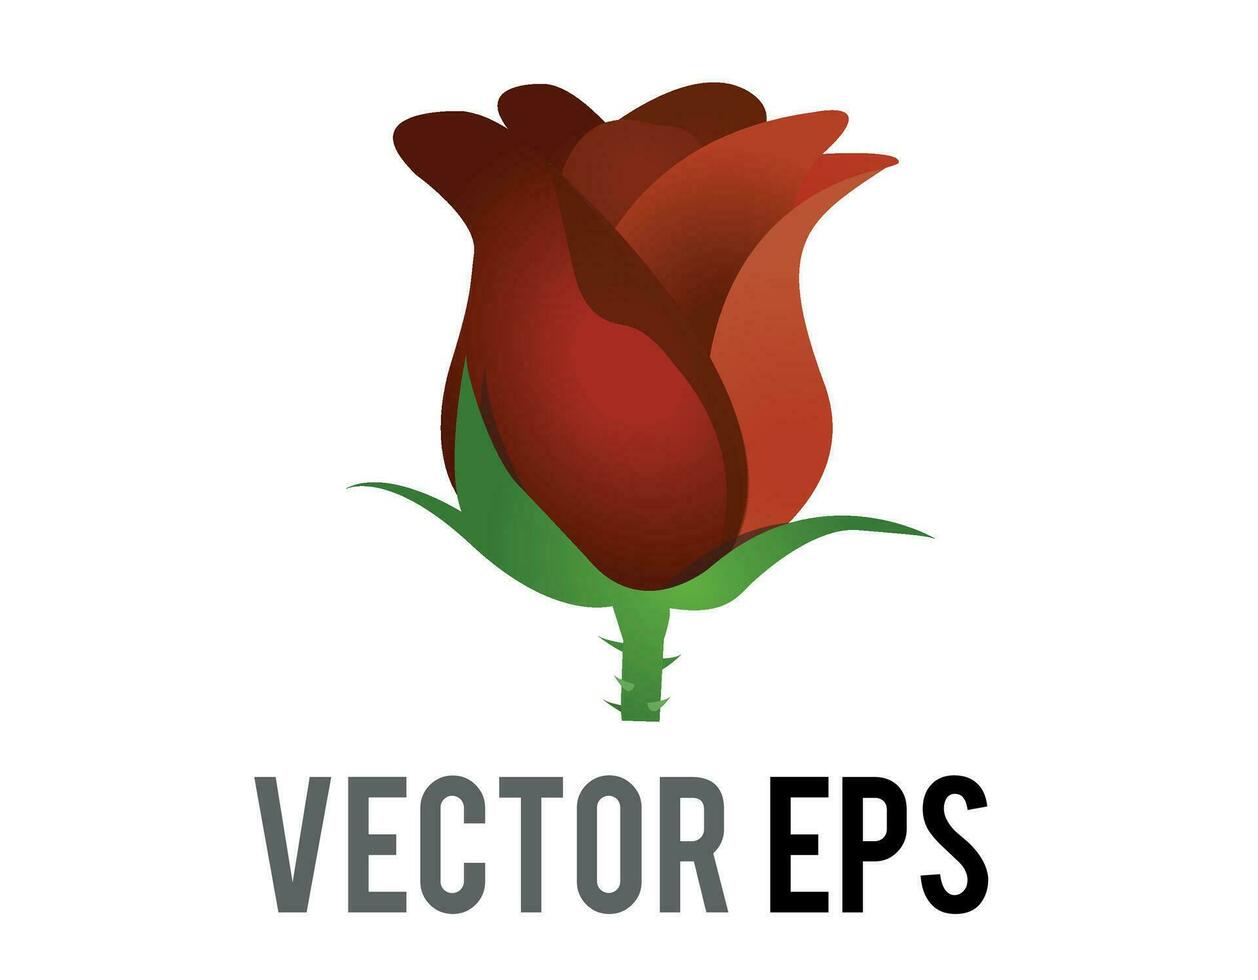 Vector marroon dark red rose flower icon with green stem and leaves